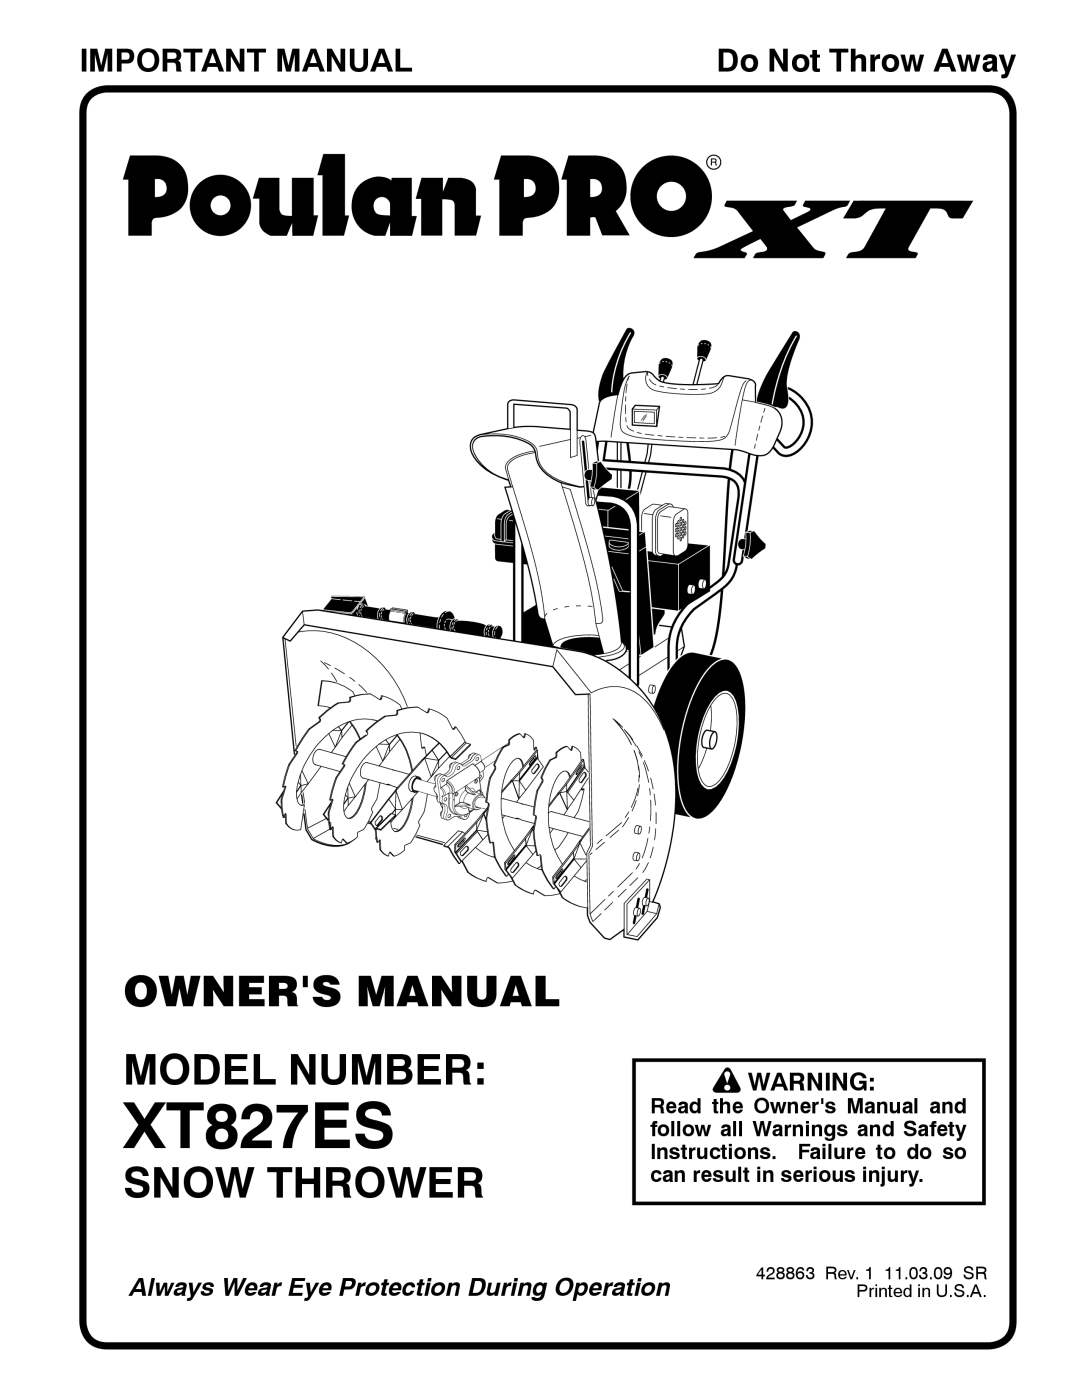 Poulan 96192003400 owner manual Owners Manual Model Number, Snow Thrower, Important Manual, XT827ES, Do Not Throw Away 